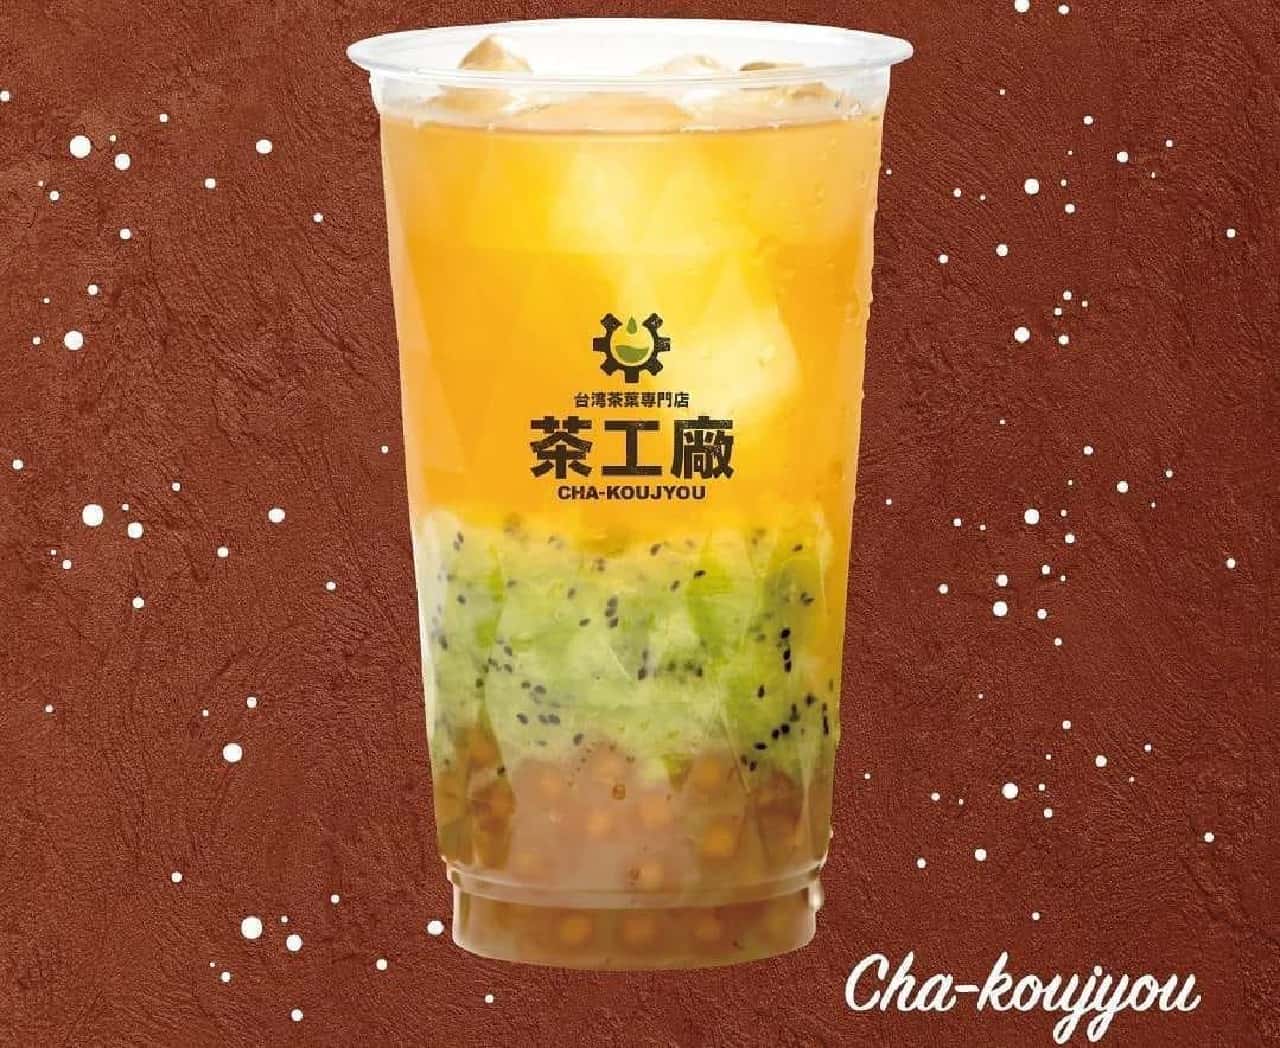 Appeared in "Marugoto Fruit Tea", a tapioca drink containing 1 fruit, and "Tea Factory" in Jiyugaoka